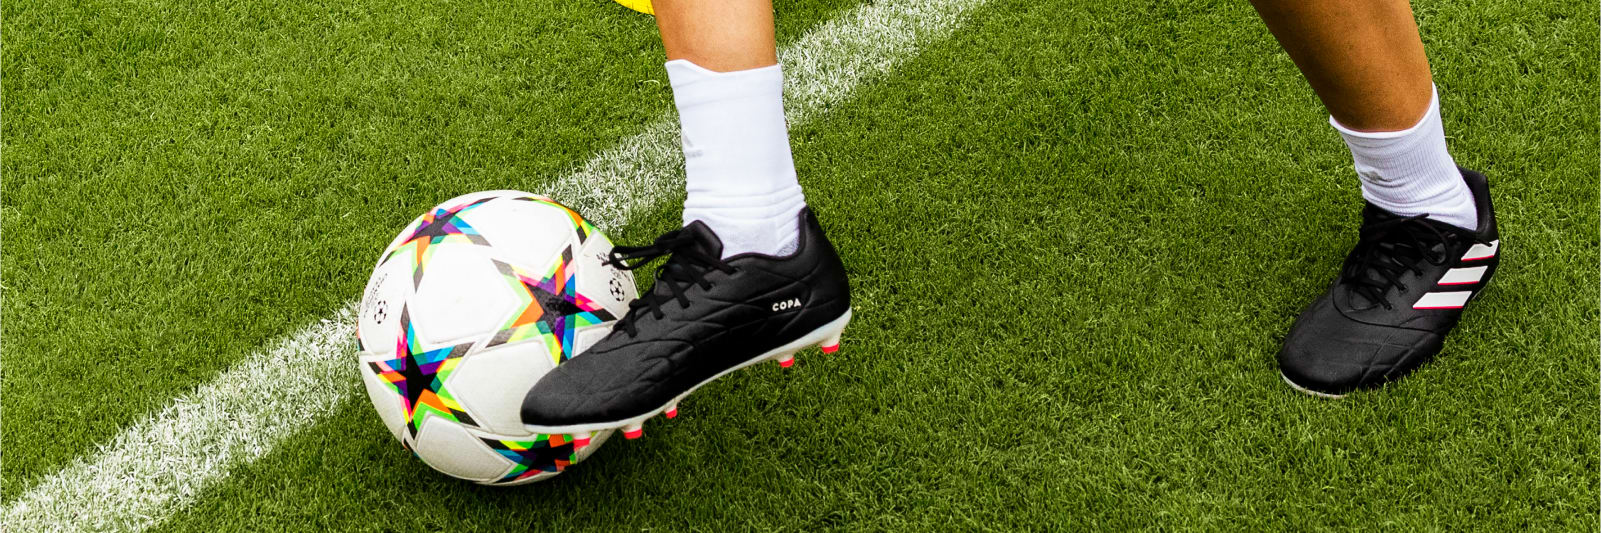 How to Buy Soccer Cleats: Fit, Features, Field Surface